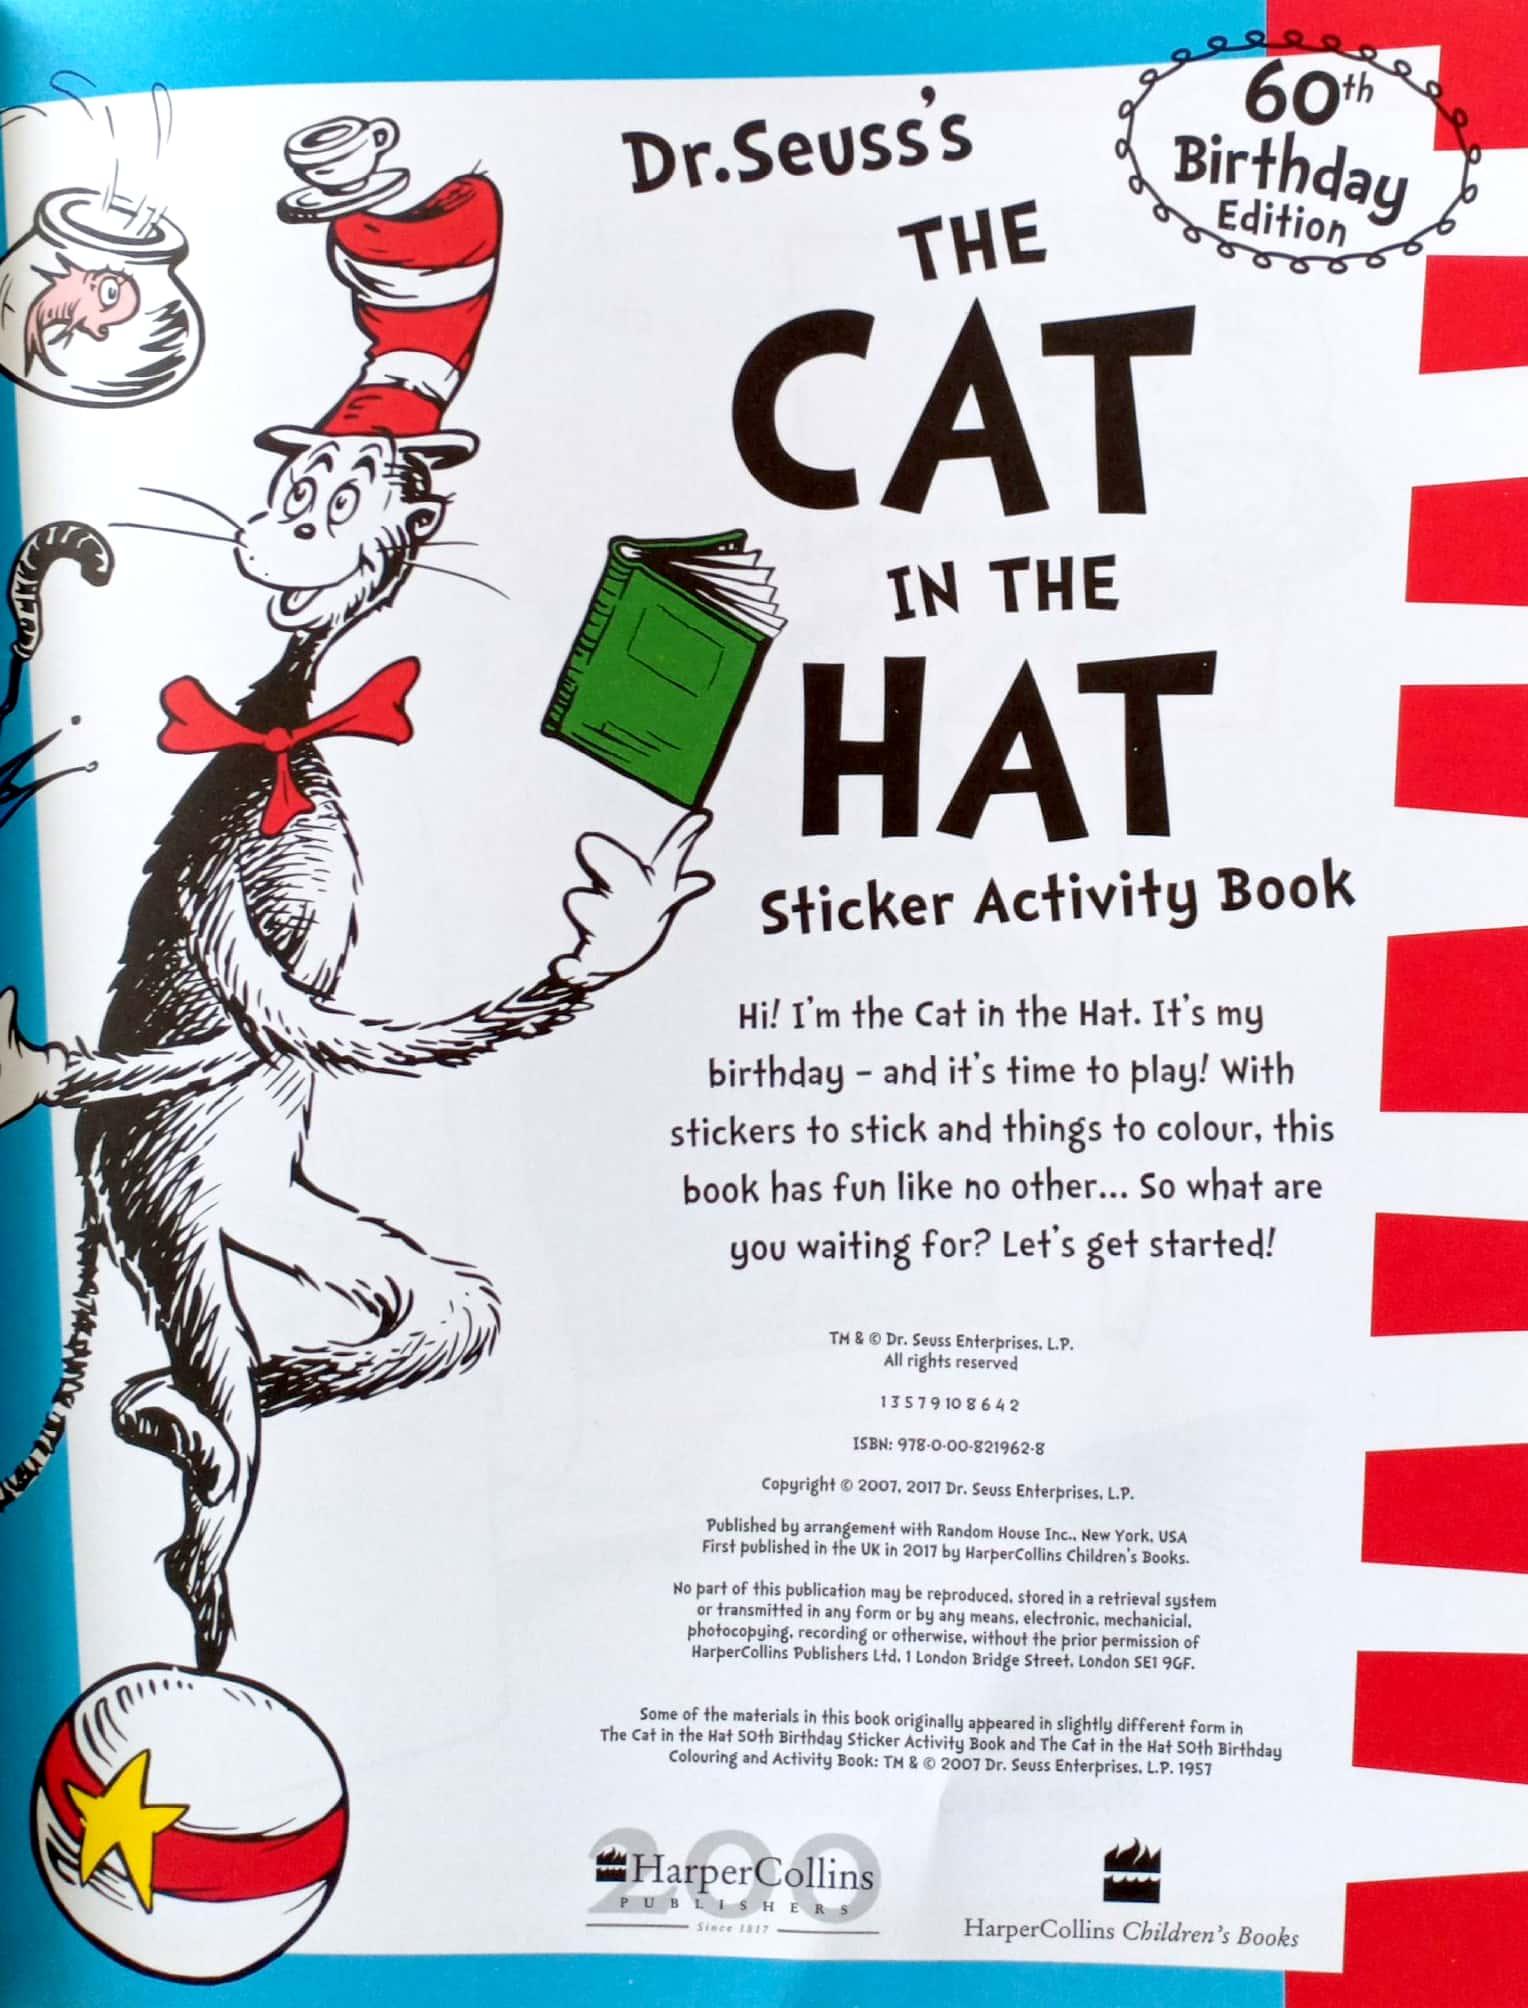 The Cat in the Hat Sticker Activity Book. 60th Birthday Edition